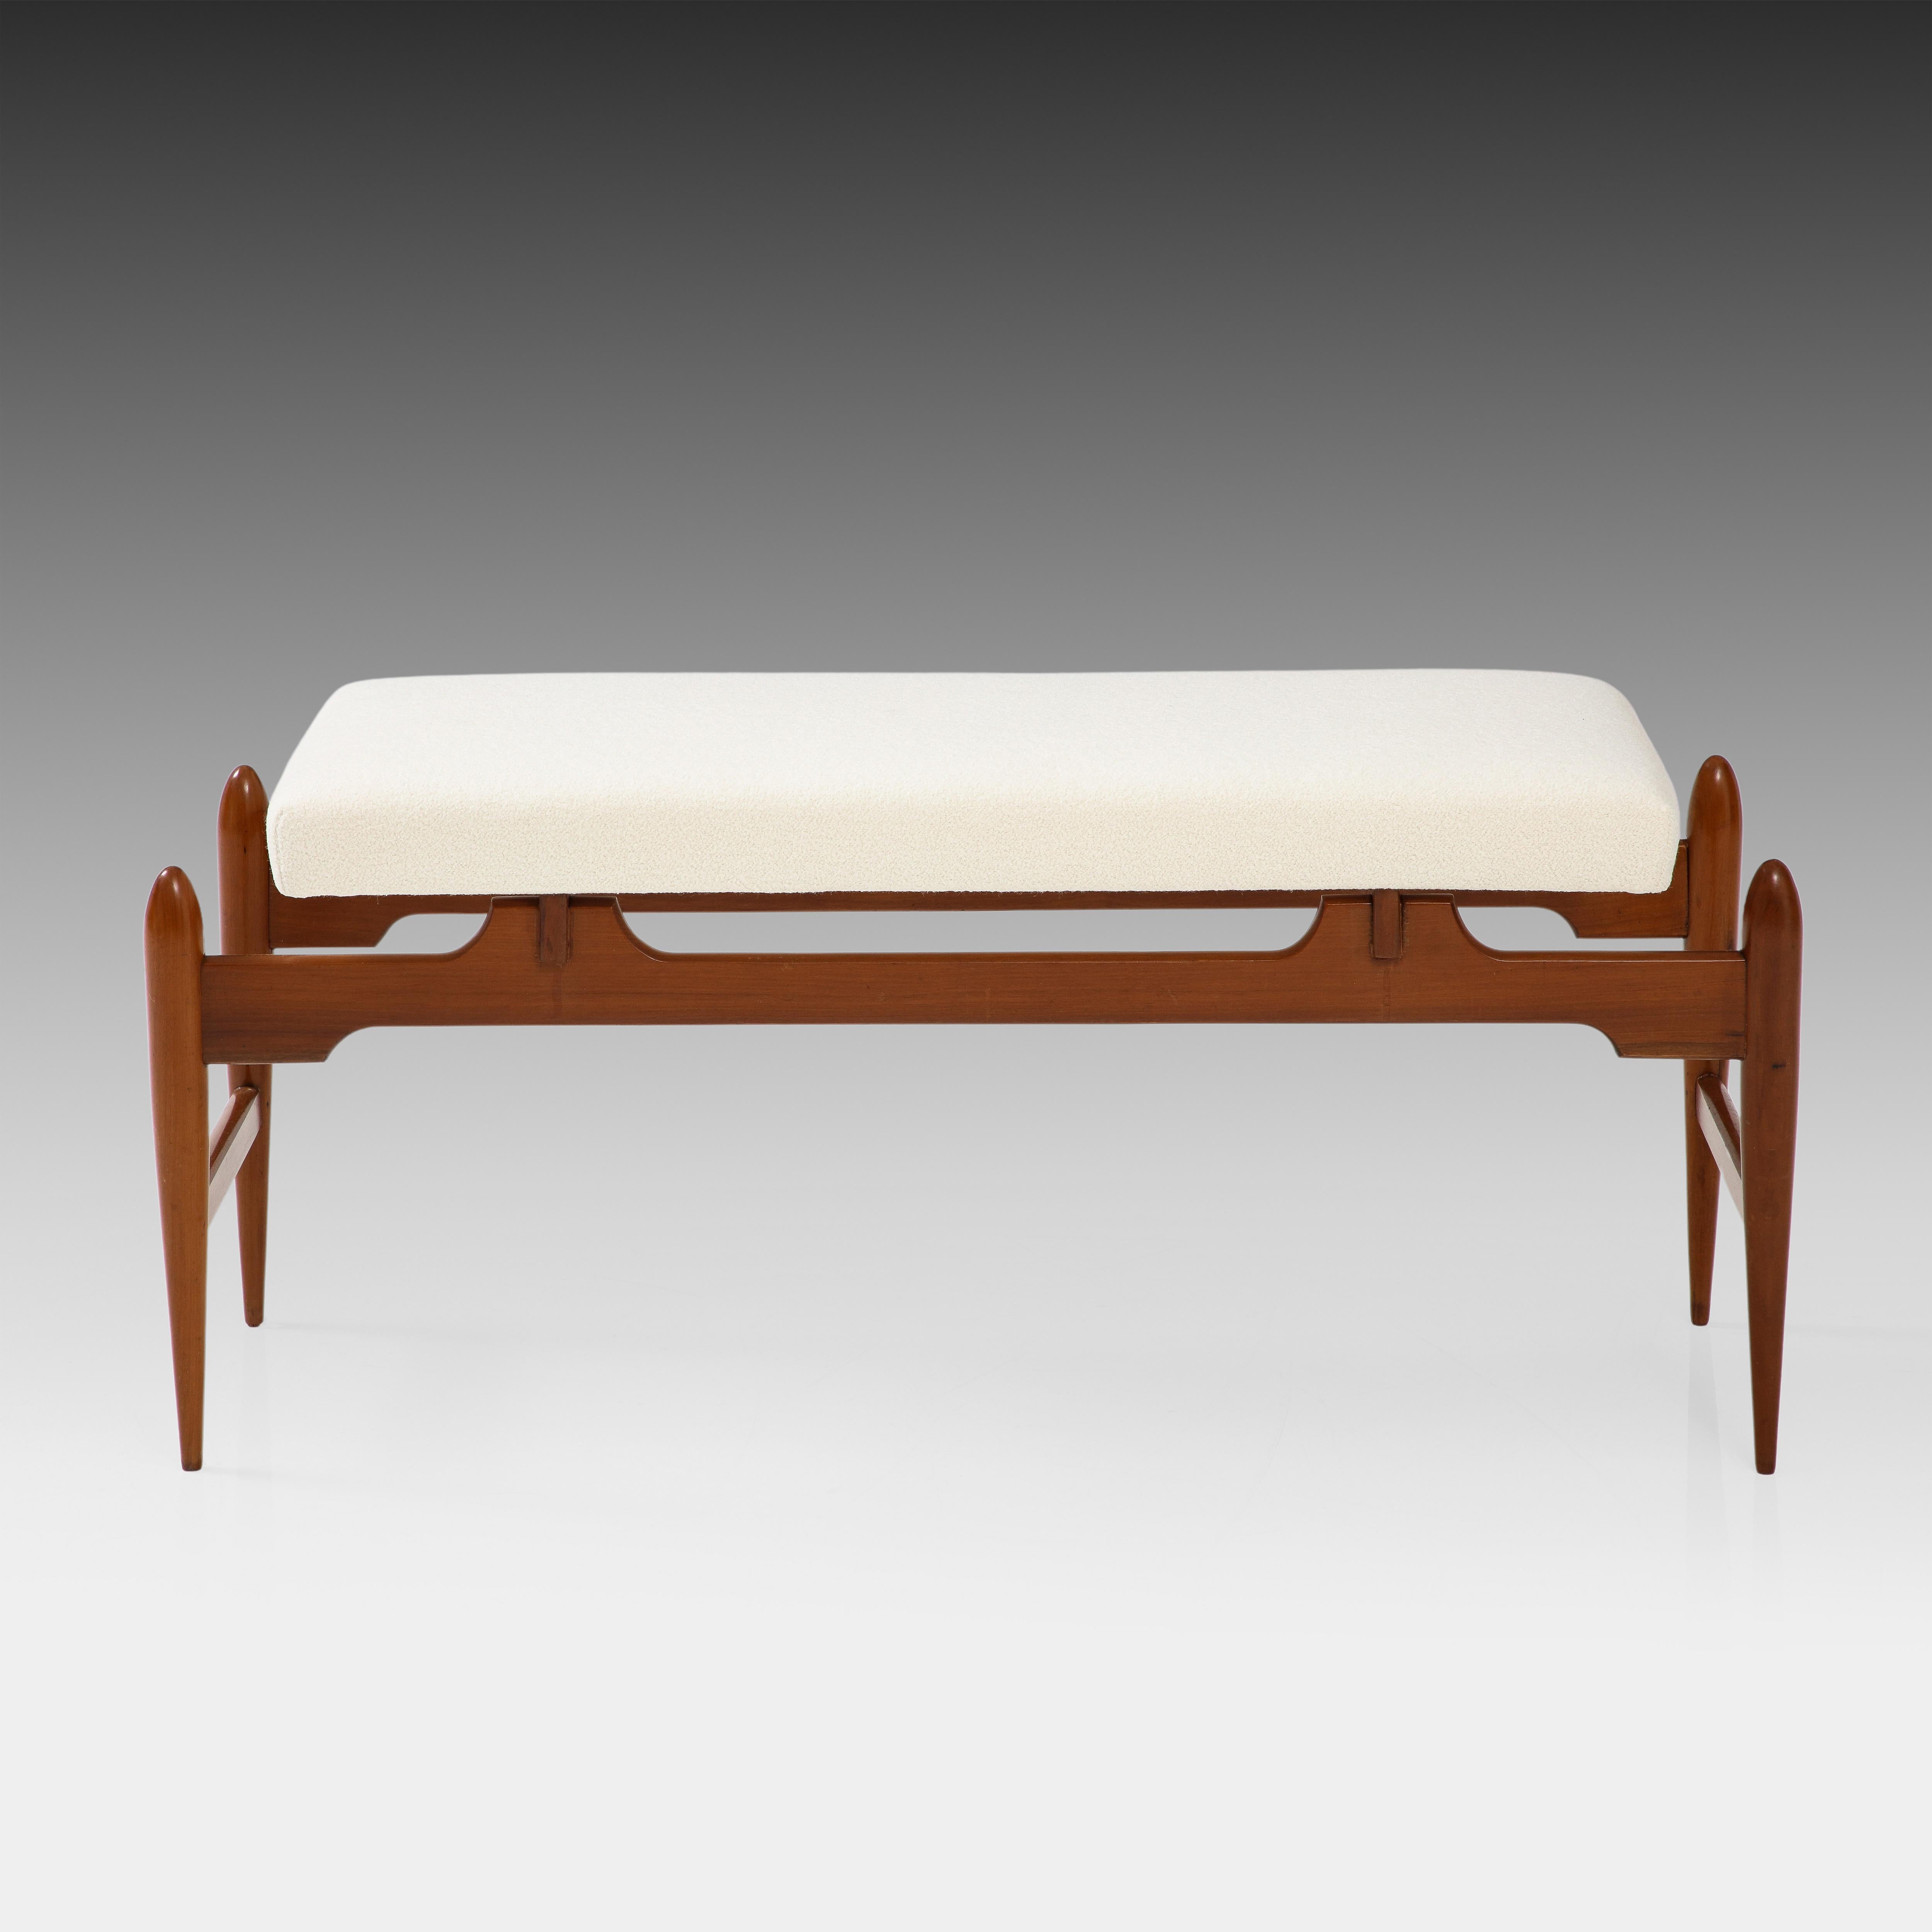 Italian modernist bench with clean architectural lines on sculptural wood frame and upholstered cushion seat.  
Fully restored and newly upholstered in a luxurious Holland & Sherry Brunswick Snow or ivory bouclé.